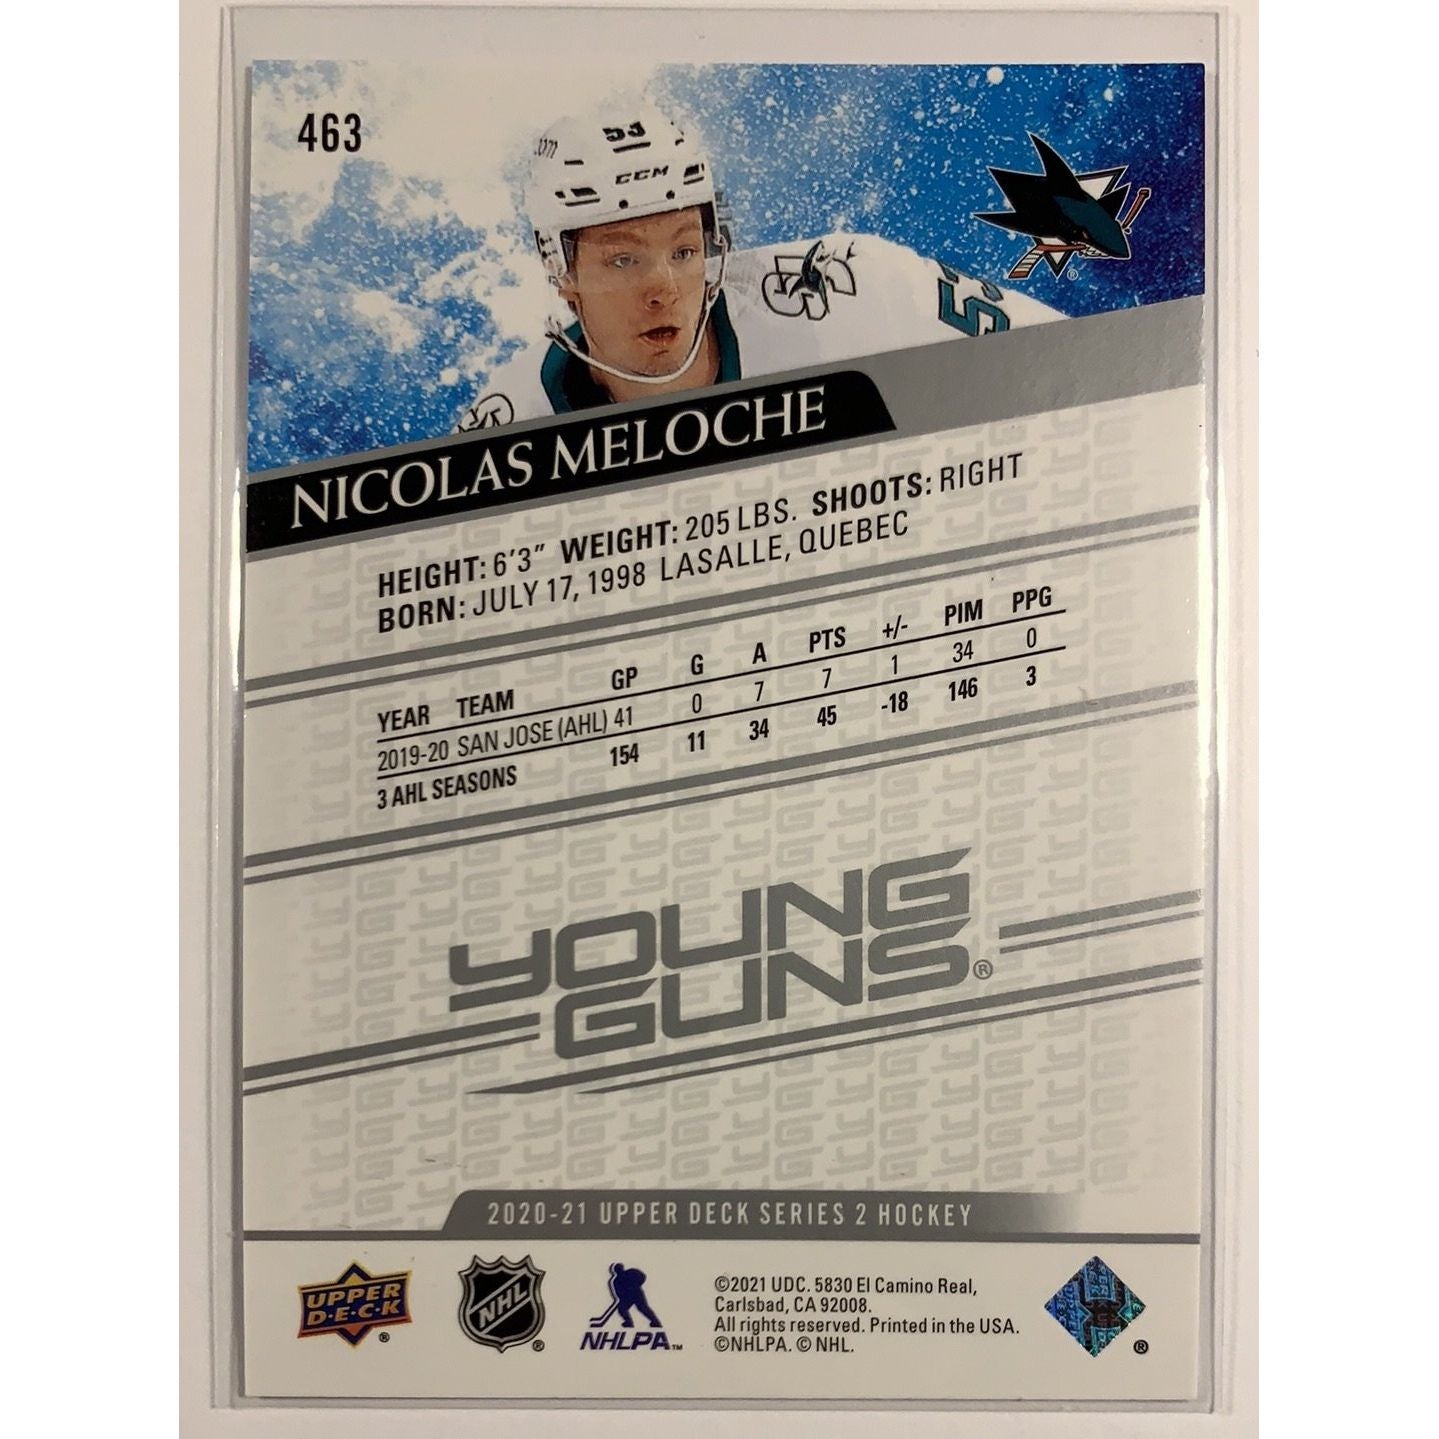  2020-21 Upper Deck Series 2 Nicolas Meloche Young Guns  Local Legends Cards & Collectibles